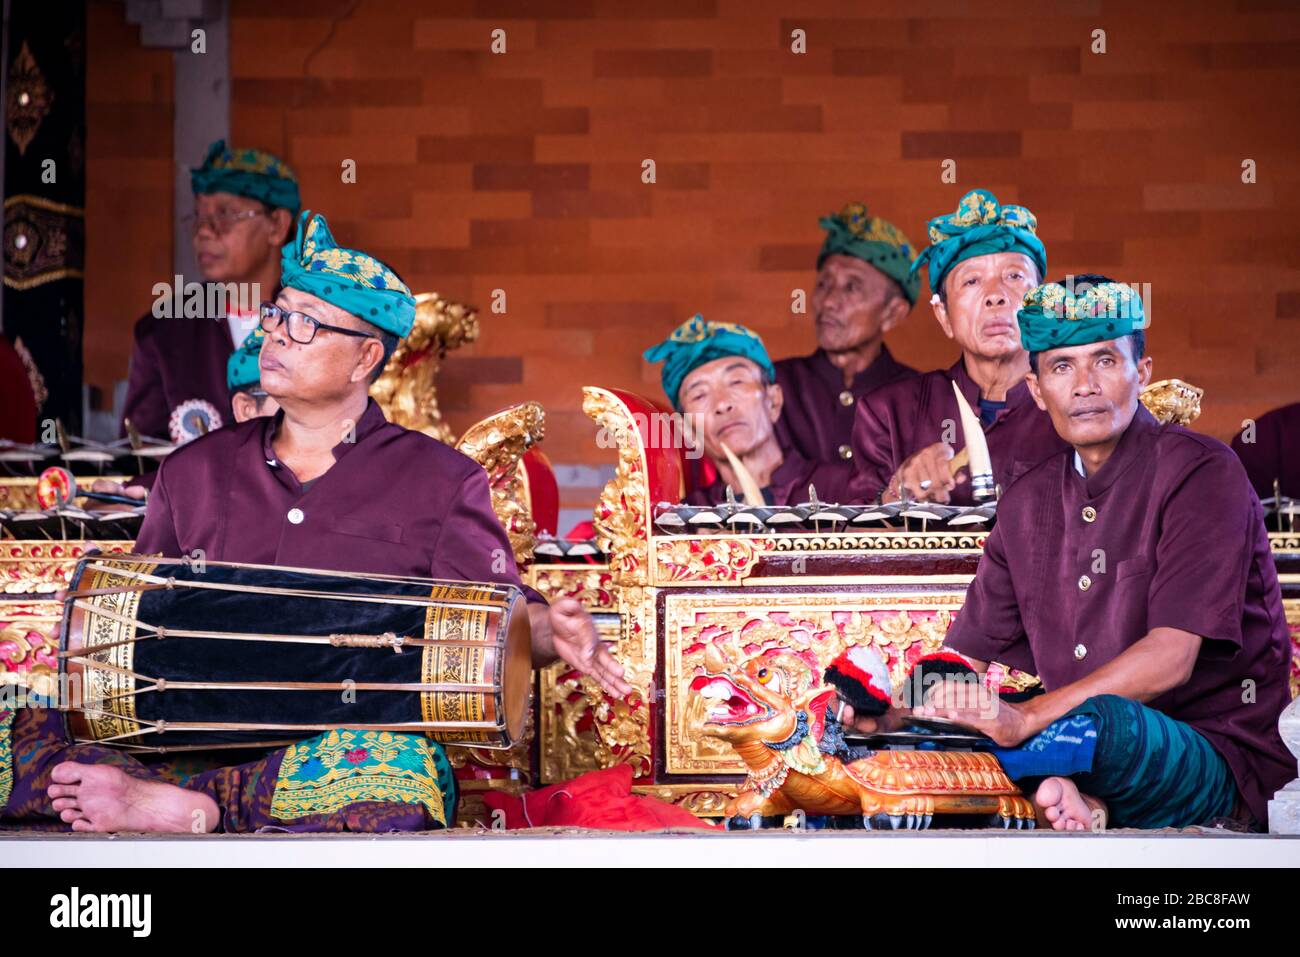 Horizontal view of a group of musicians playing traditional Balinese music in Indonesia. Stock Photo